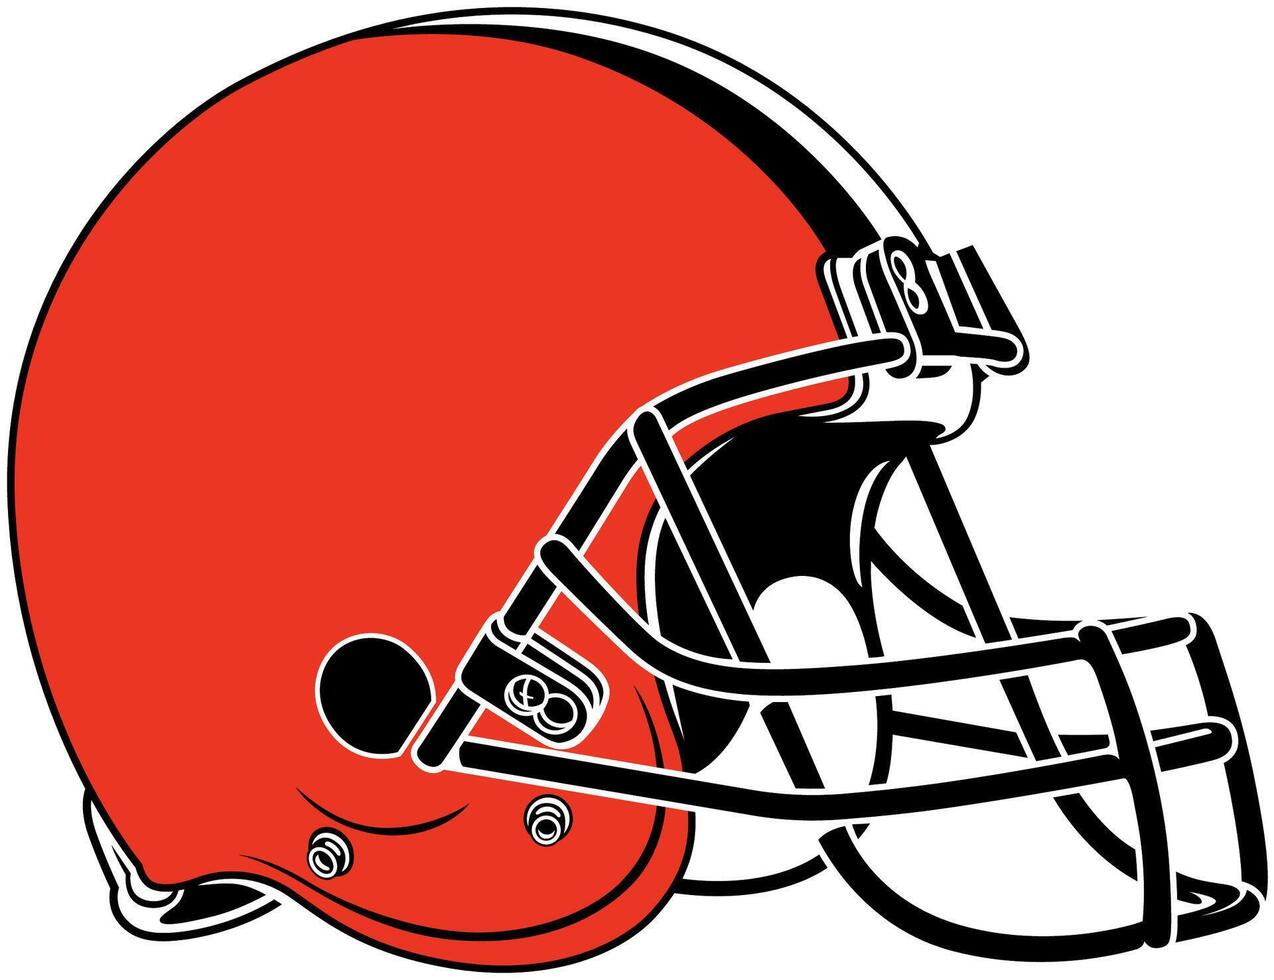 The orange helmet of the Cleveland Browns American football team vector